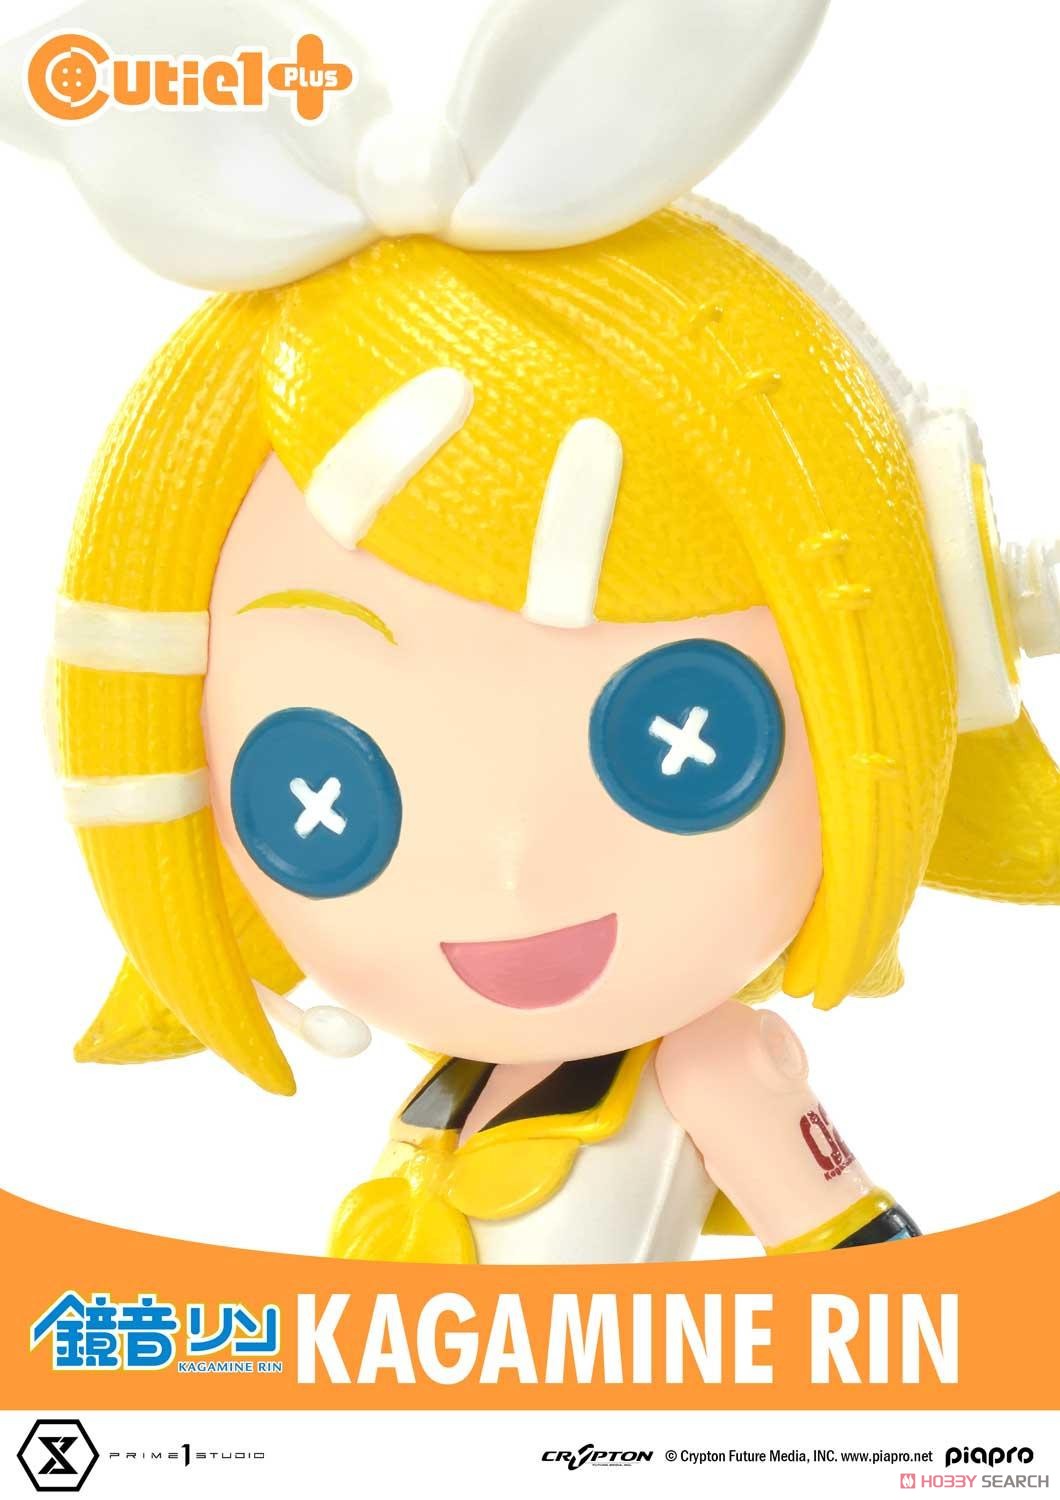 Cutie1 Plus Piapro Characters Kagamine Rin (Completed) Item picture5